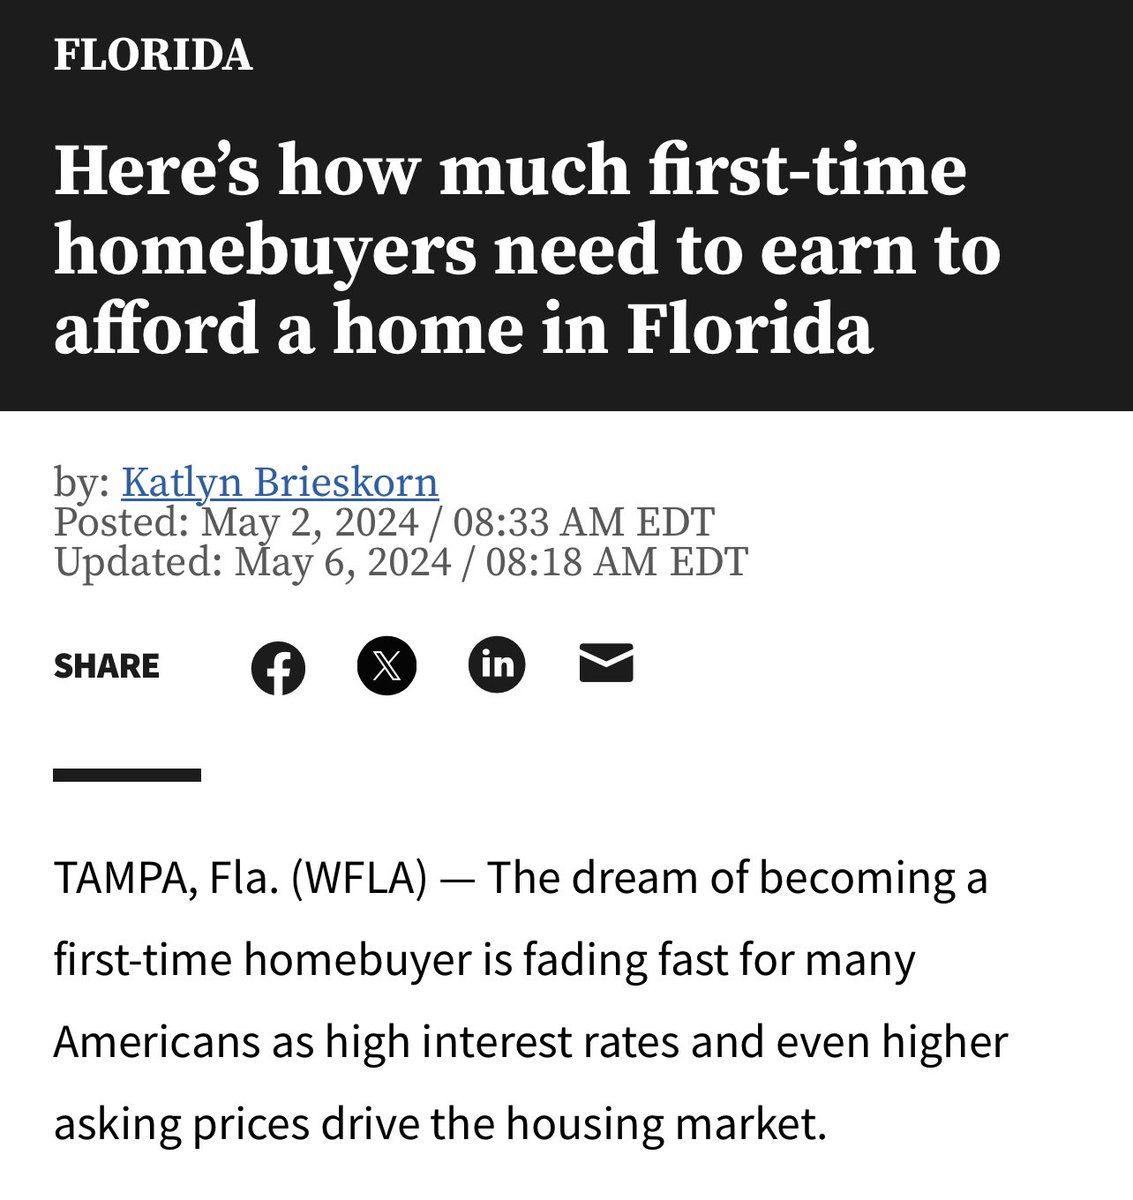 In Tampa Bay, a first-time homebuyer would need to earn $106,116 a year to afford the median home sale price of $361,177. However, the median household income is just $69,290. We need action on affordable housing NOW!

#AffordableHousing #FoxForCongress #Florida…